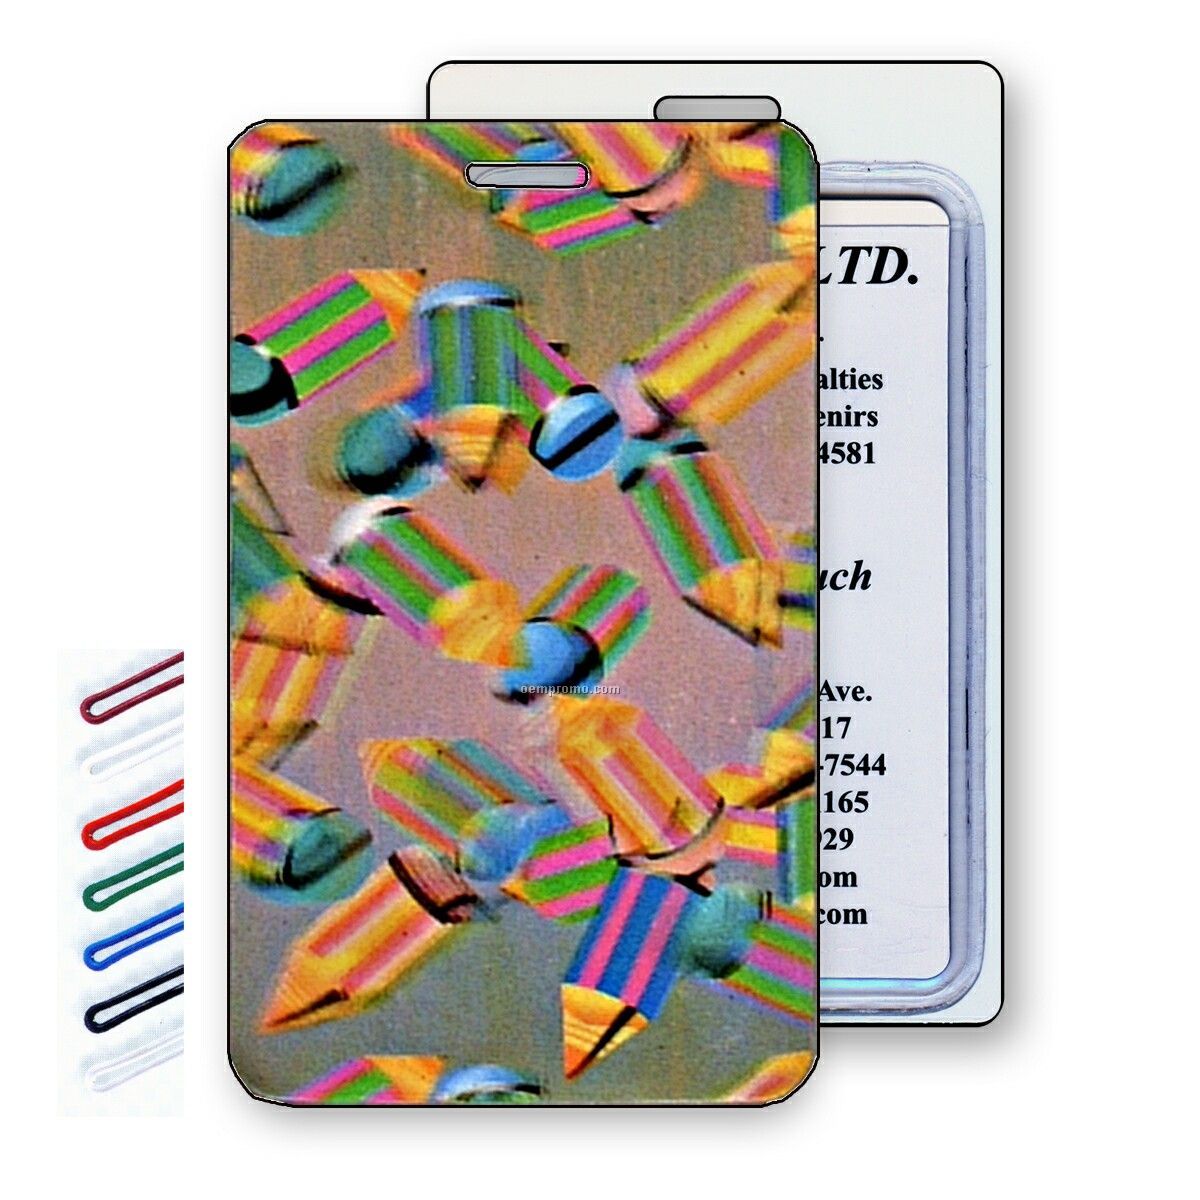 Lenticular Luggage Tags 3d Image (Pencils)